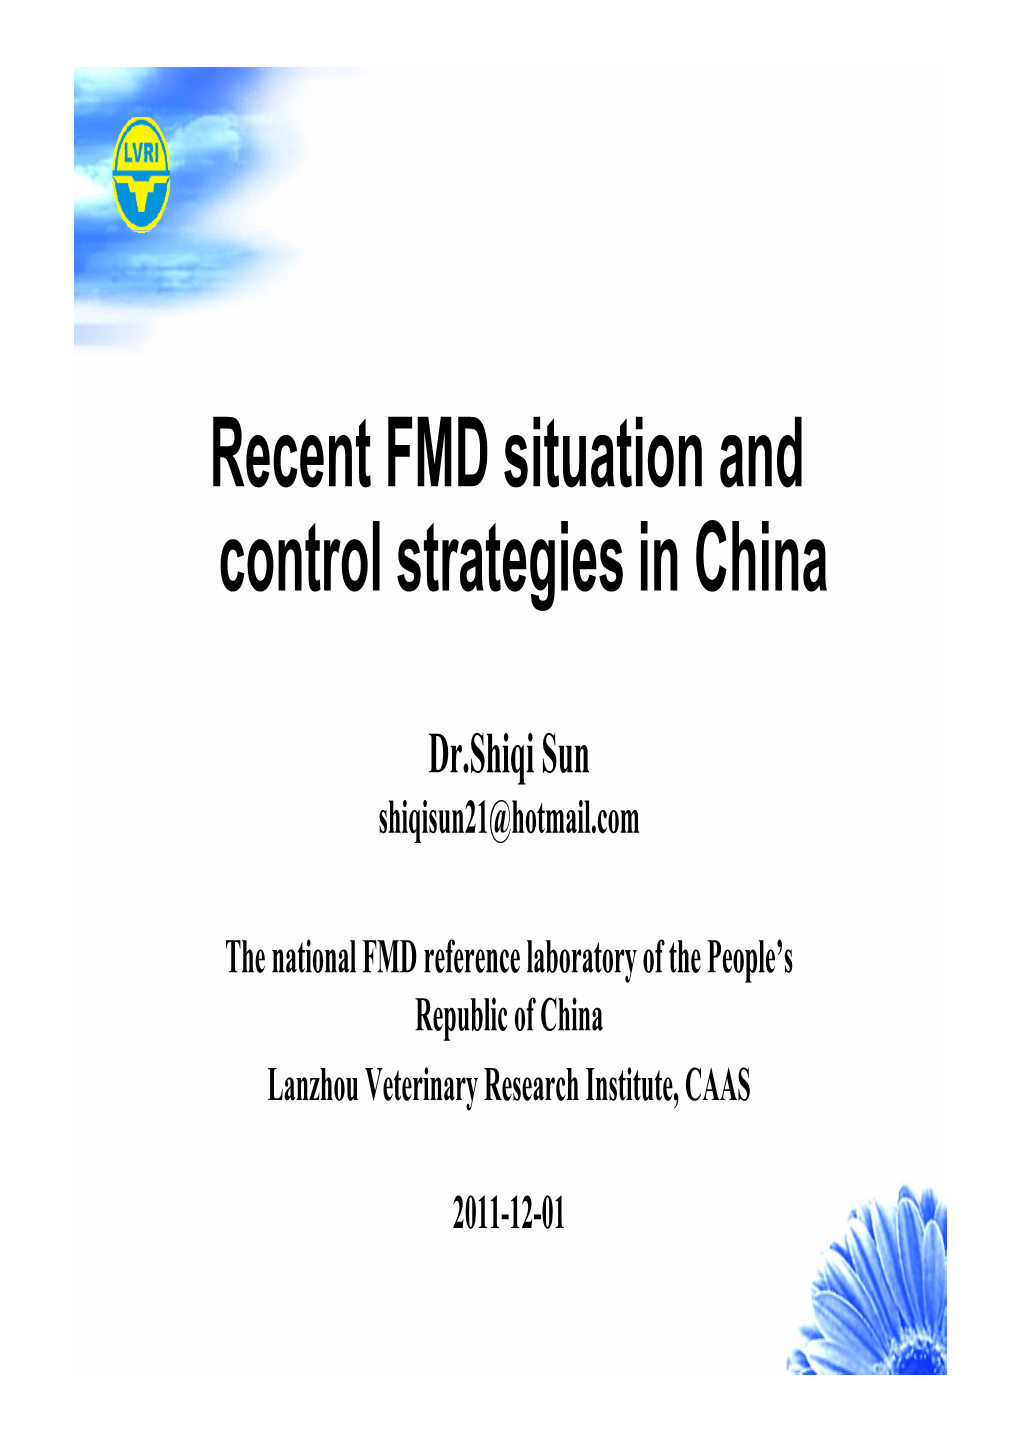 Recent FMD Situation and Control Strategies in China